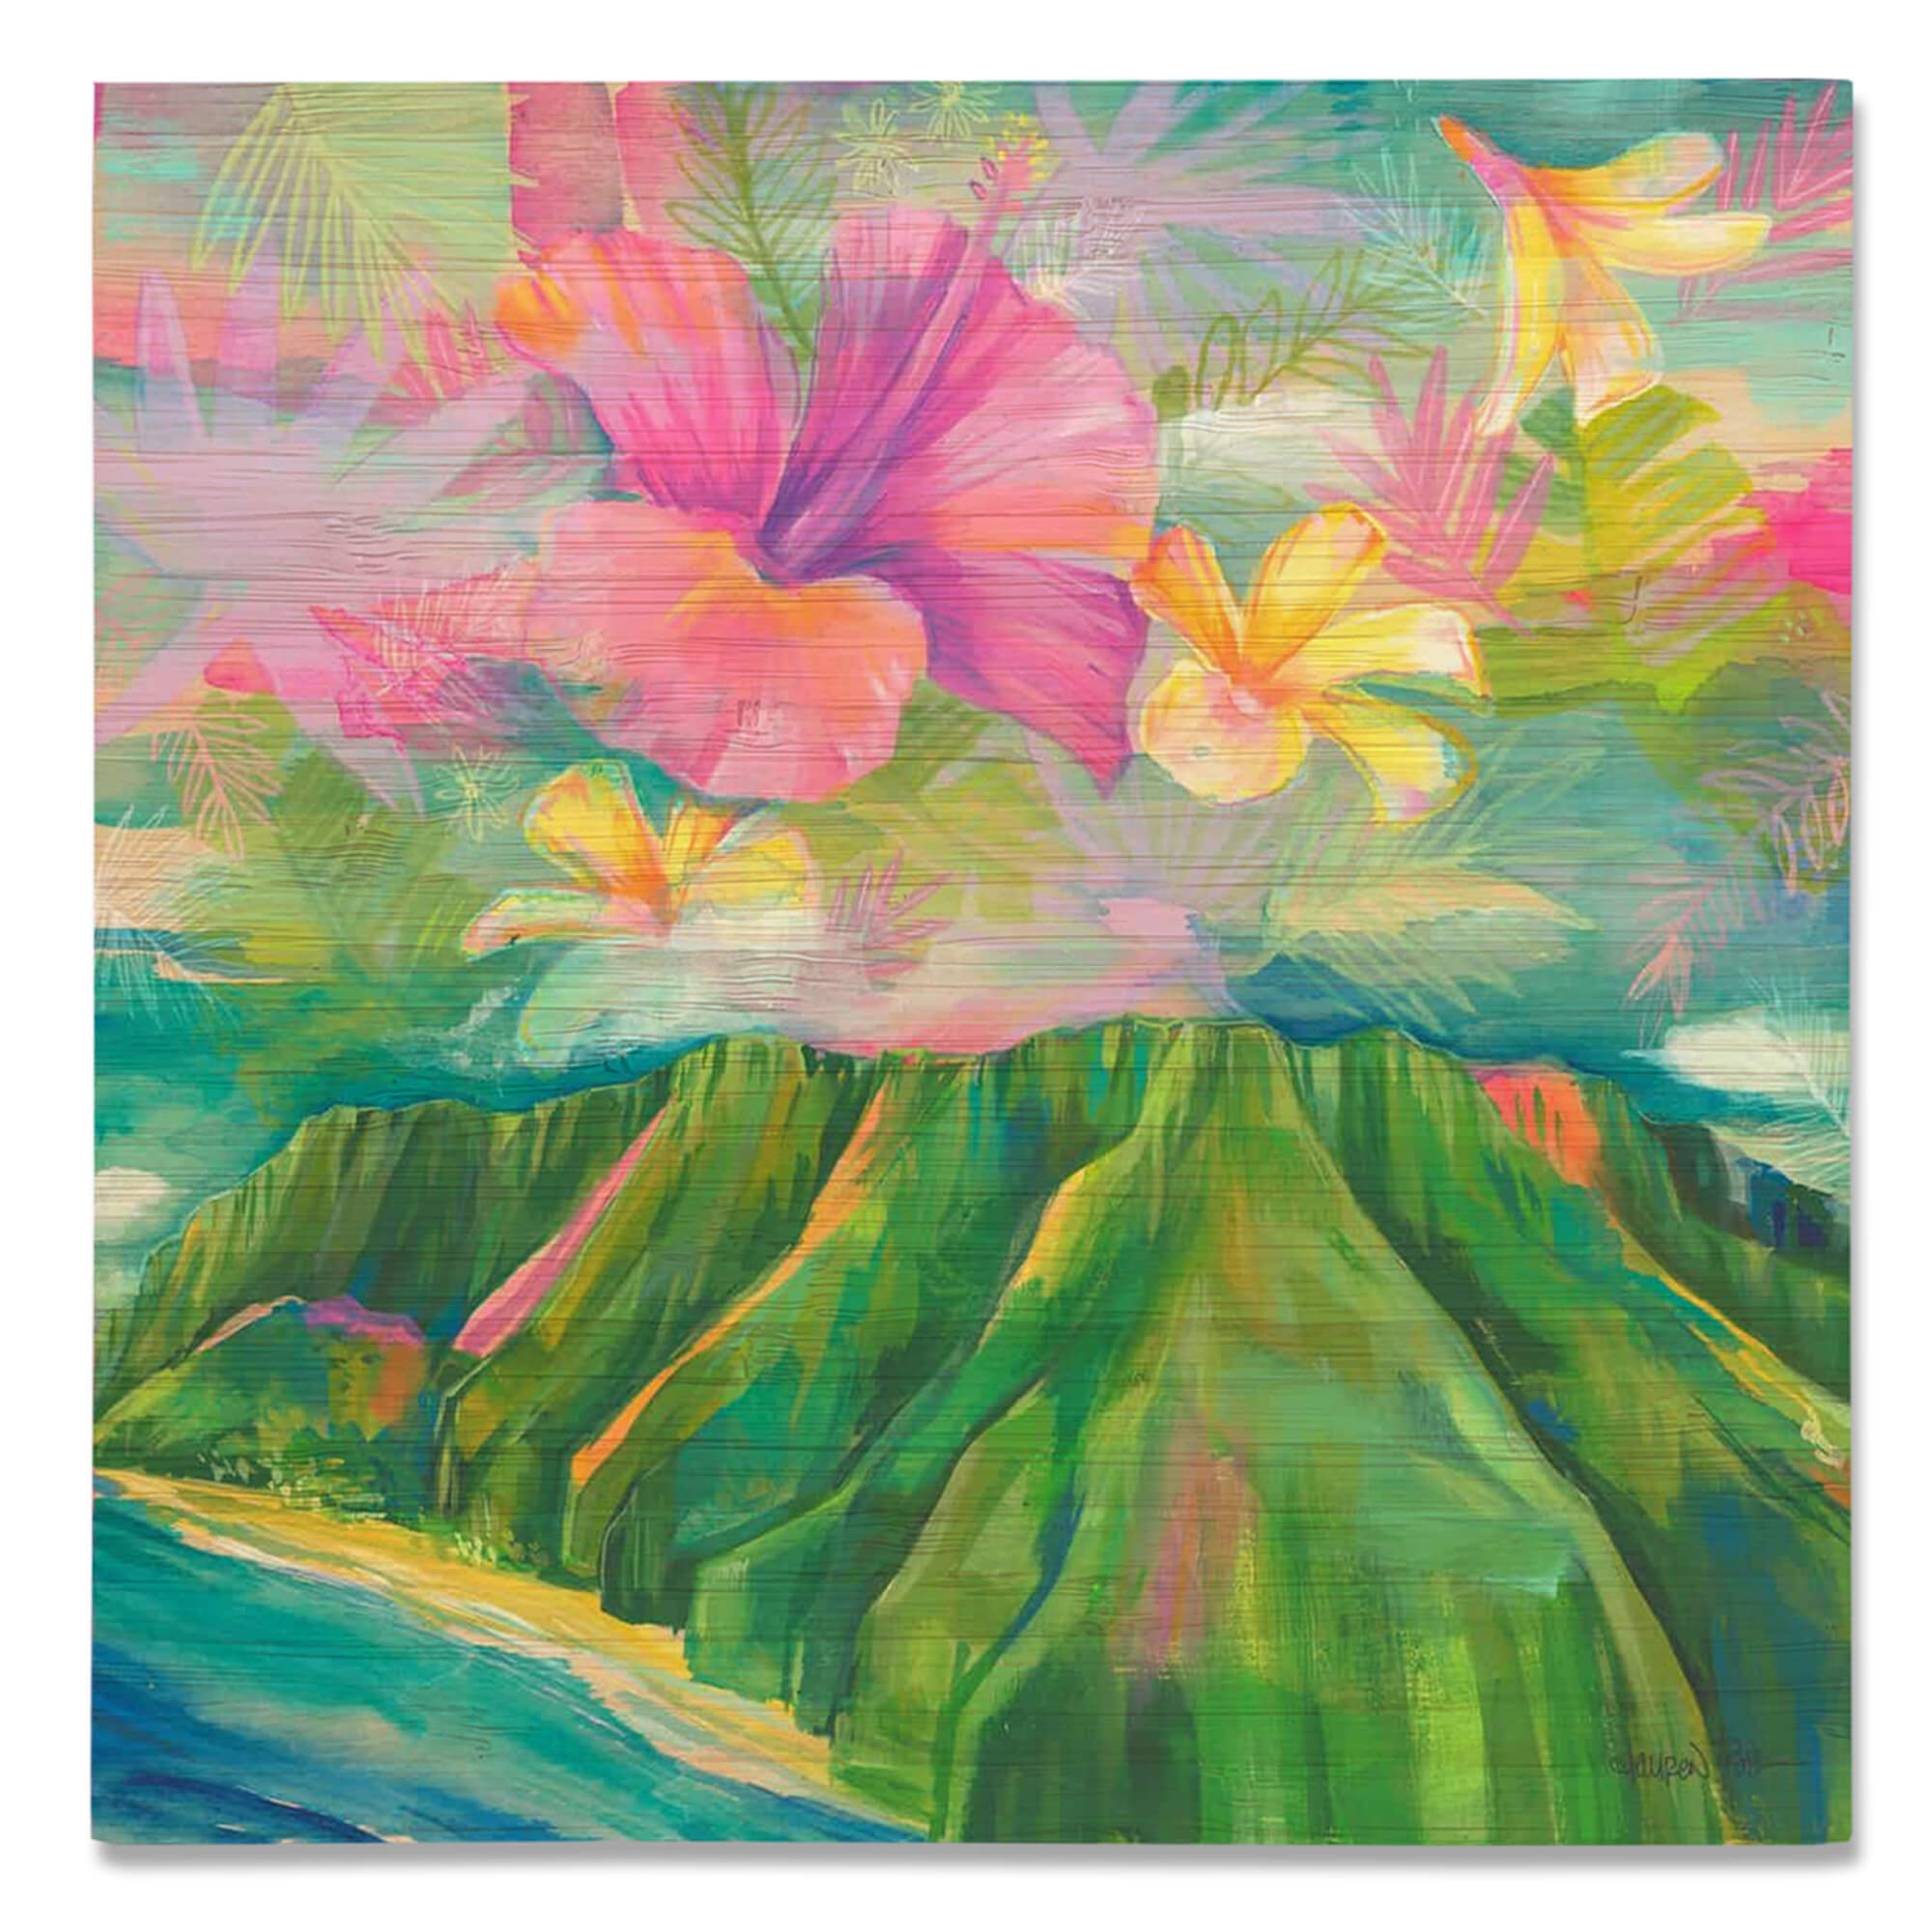 A bamboo print of the Koolau mountains beneath a vibrant sky showcasing the diversity of tropical flora by Hawaii artist Lauren Roth